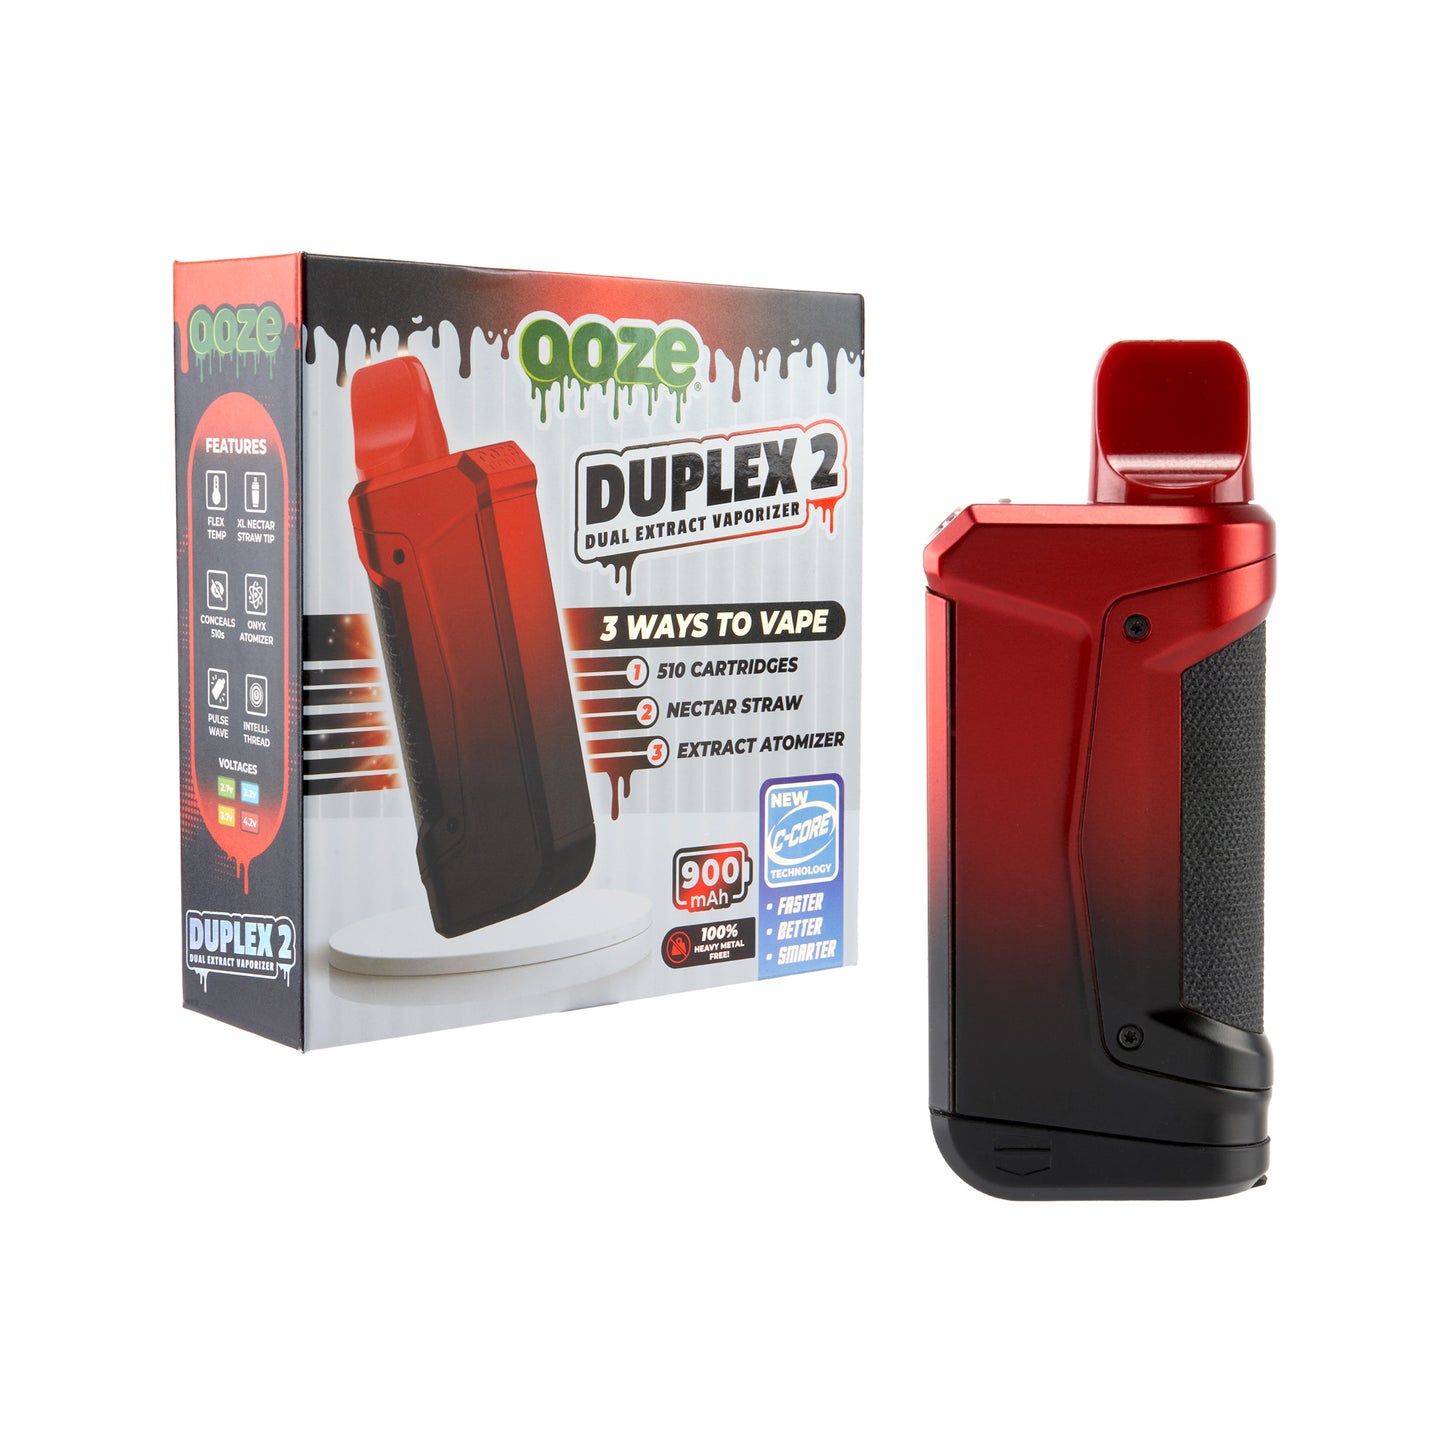 The midnight sun Ooze Duplex 2 extract vaporizer is shown next to the box